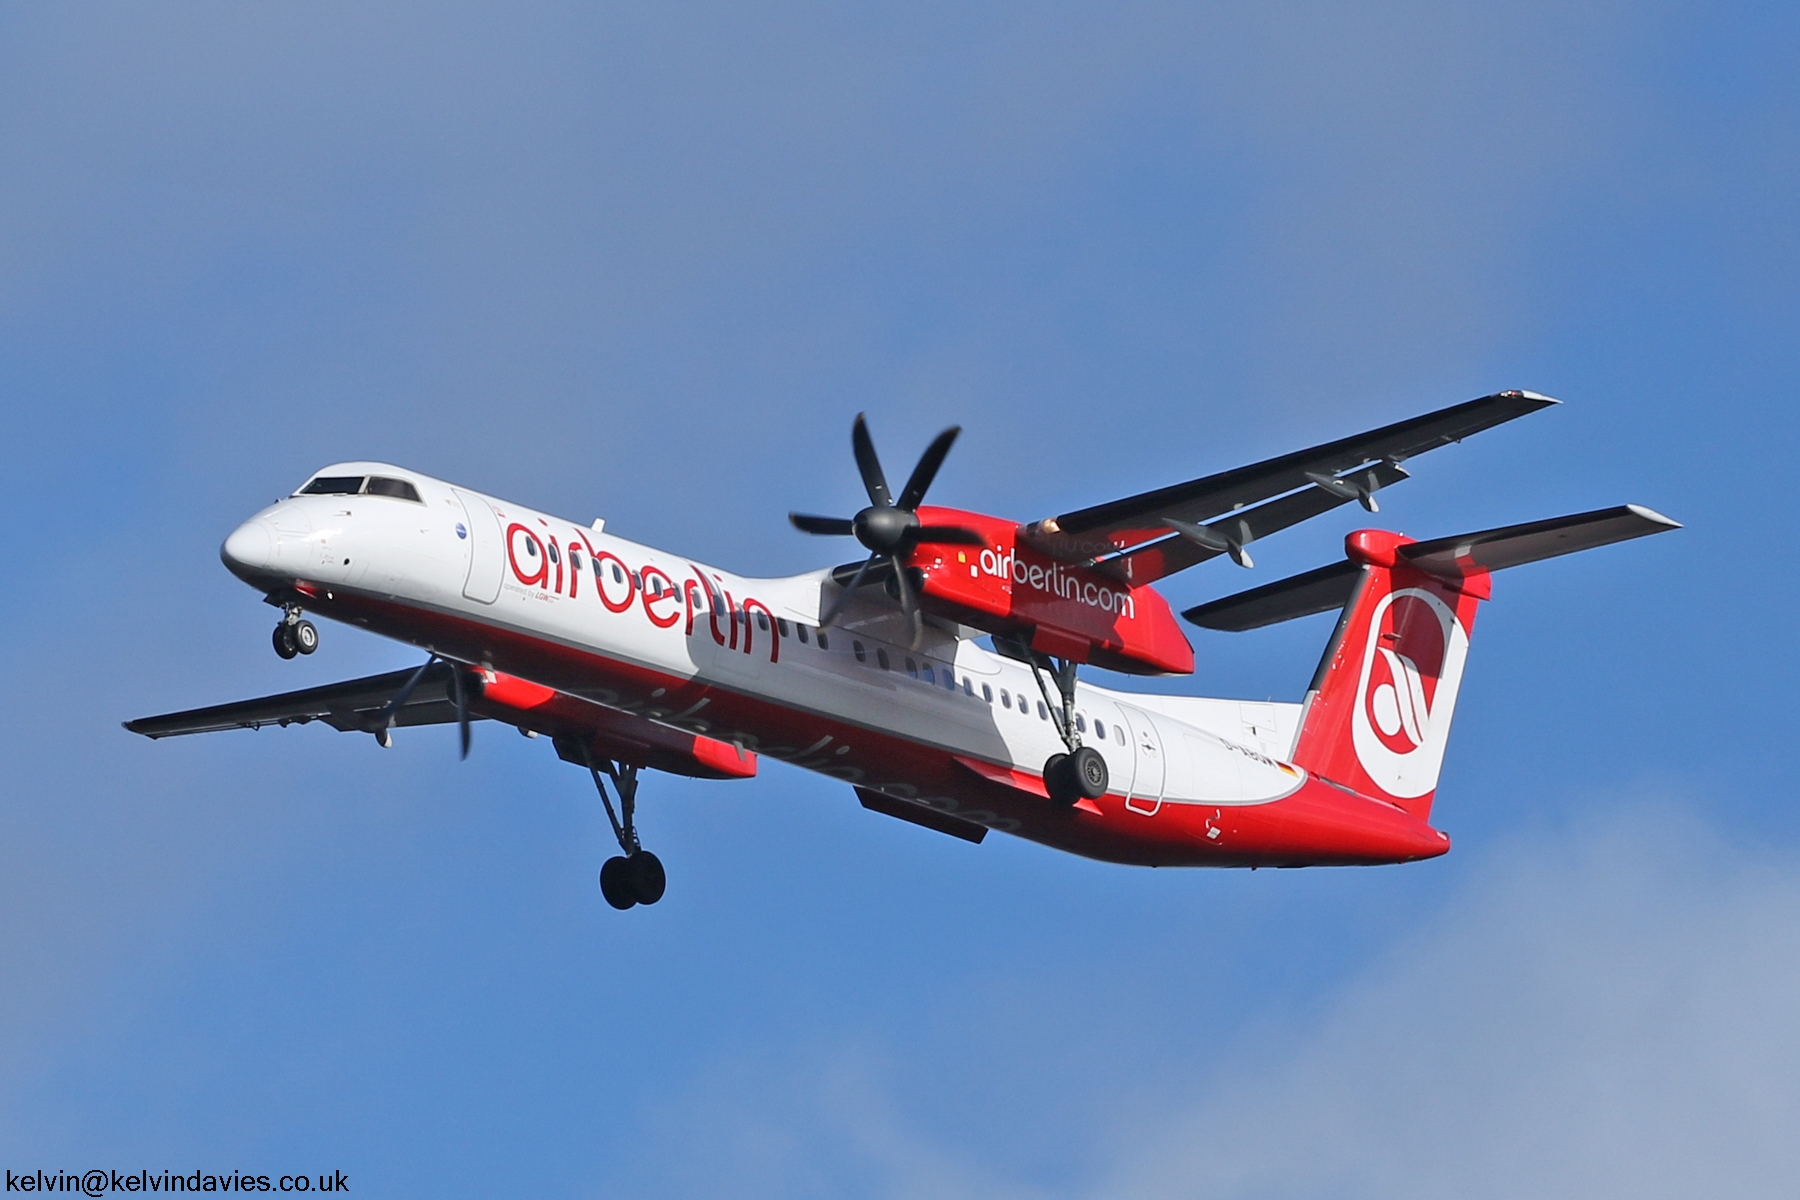 Eurowings DHC8 D-ABQM